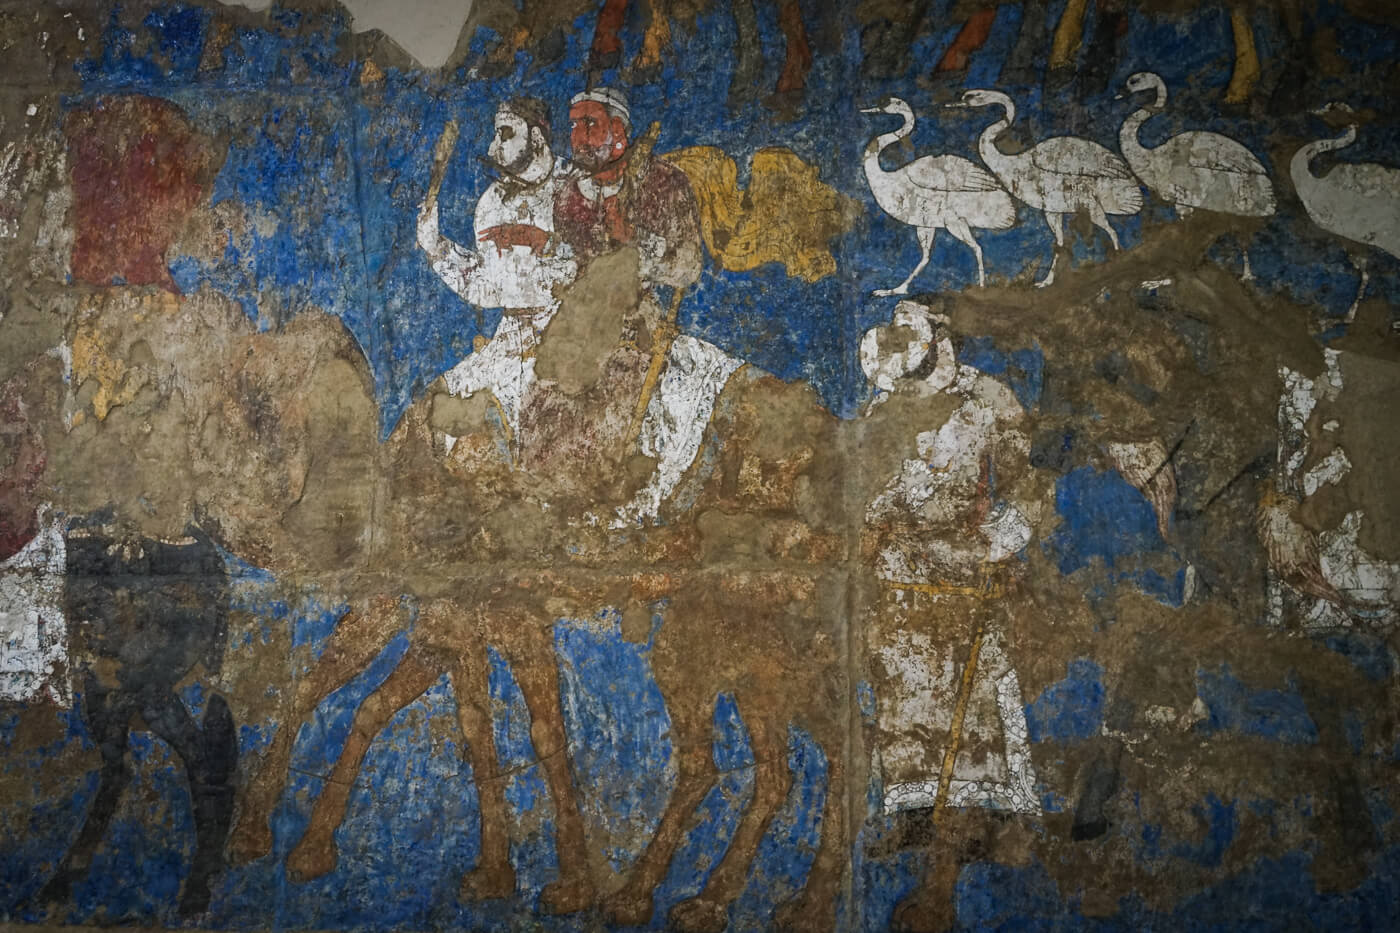 Sogdians of Central Asia, the ancient silk road traders mural from Samarkand